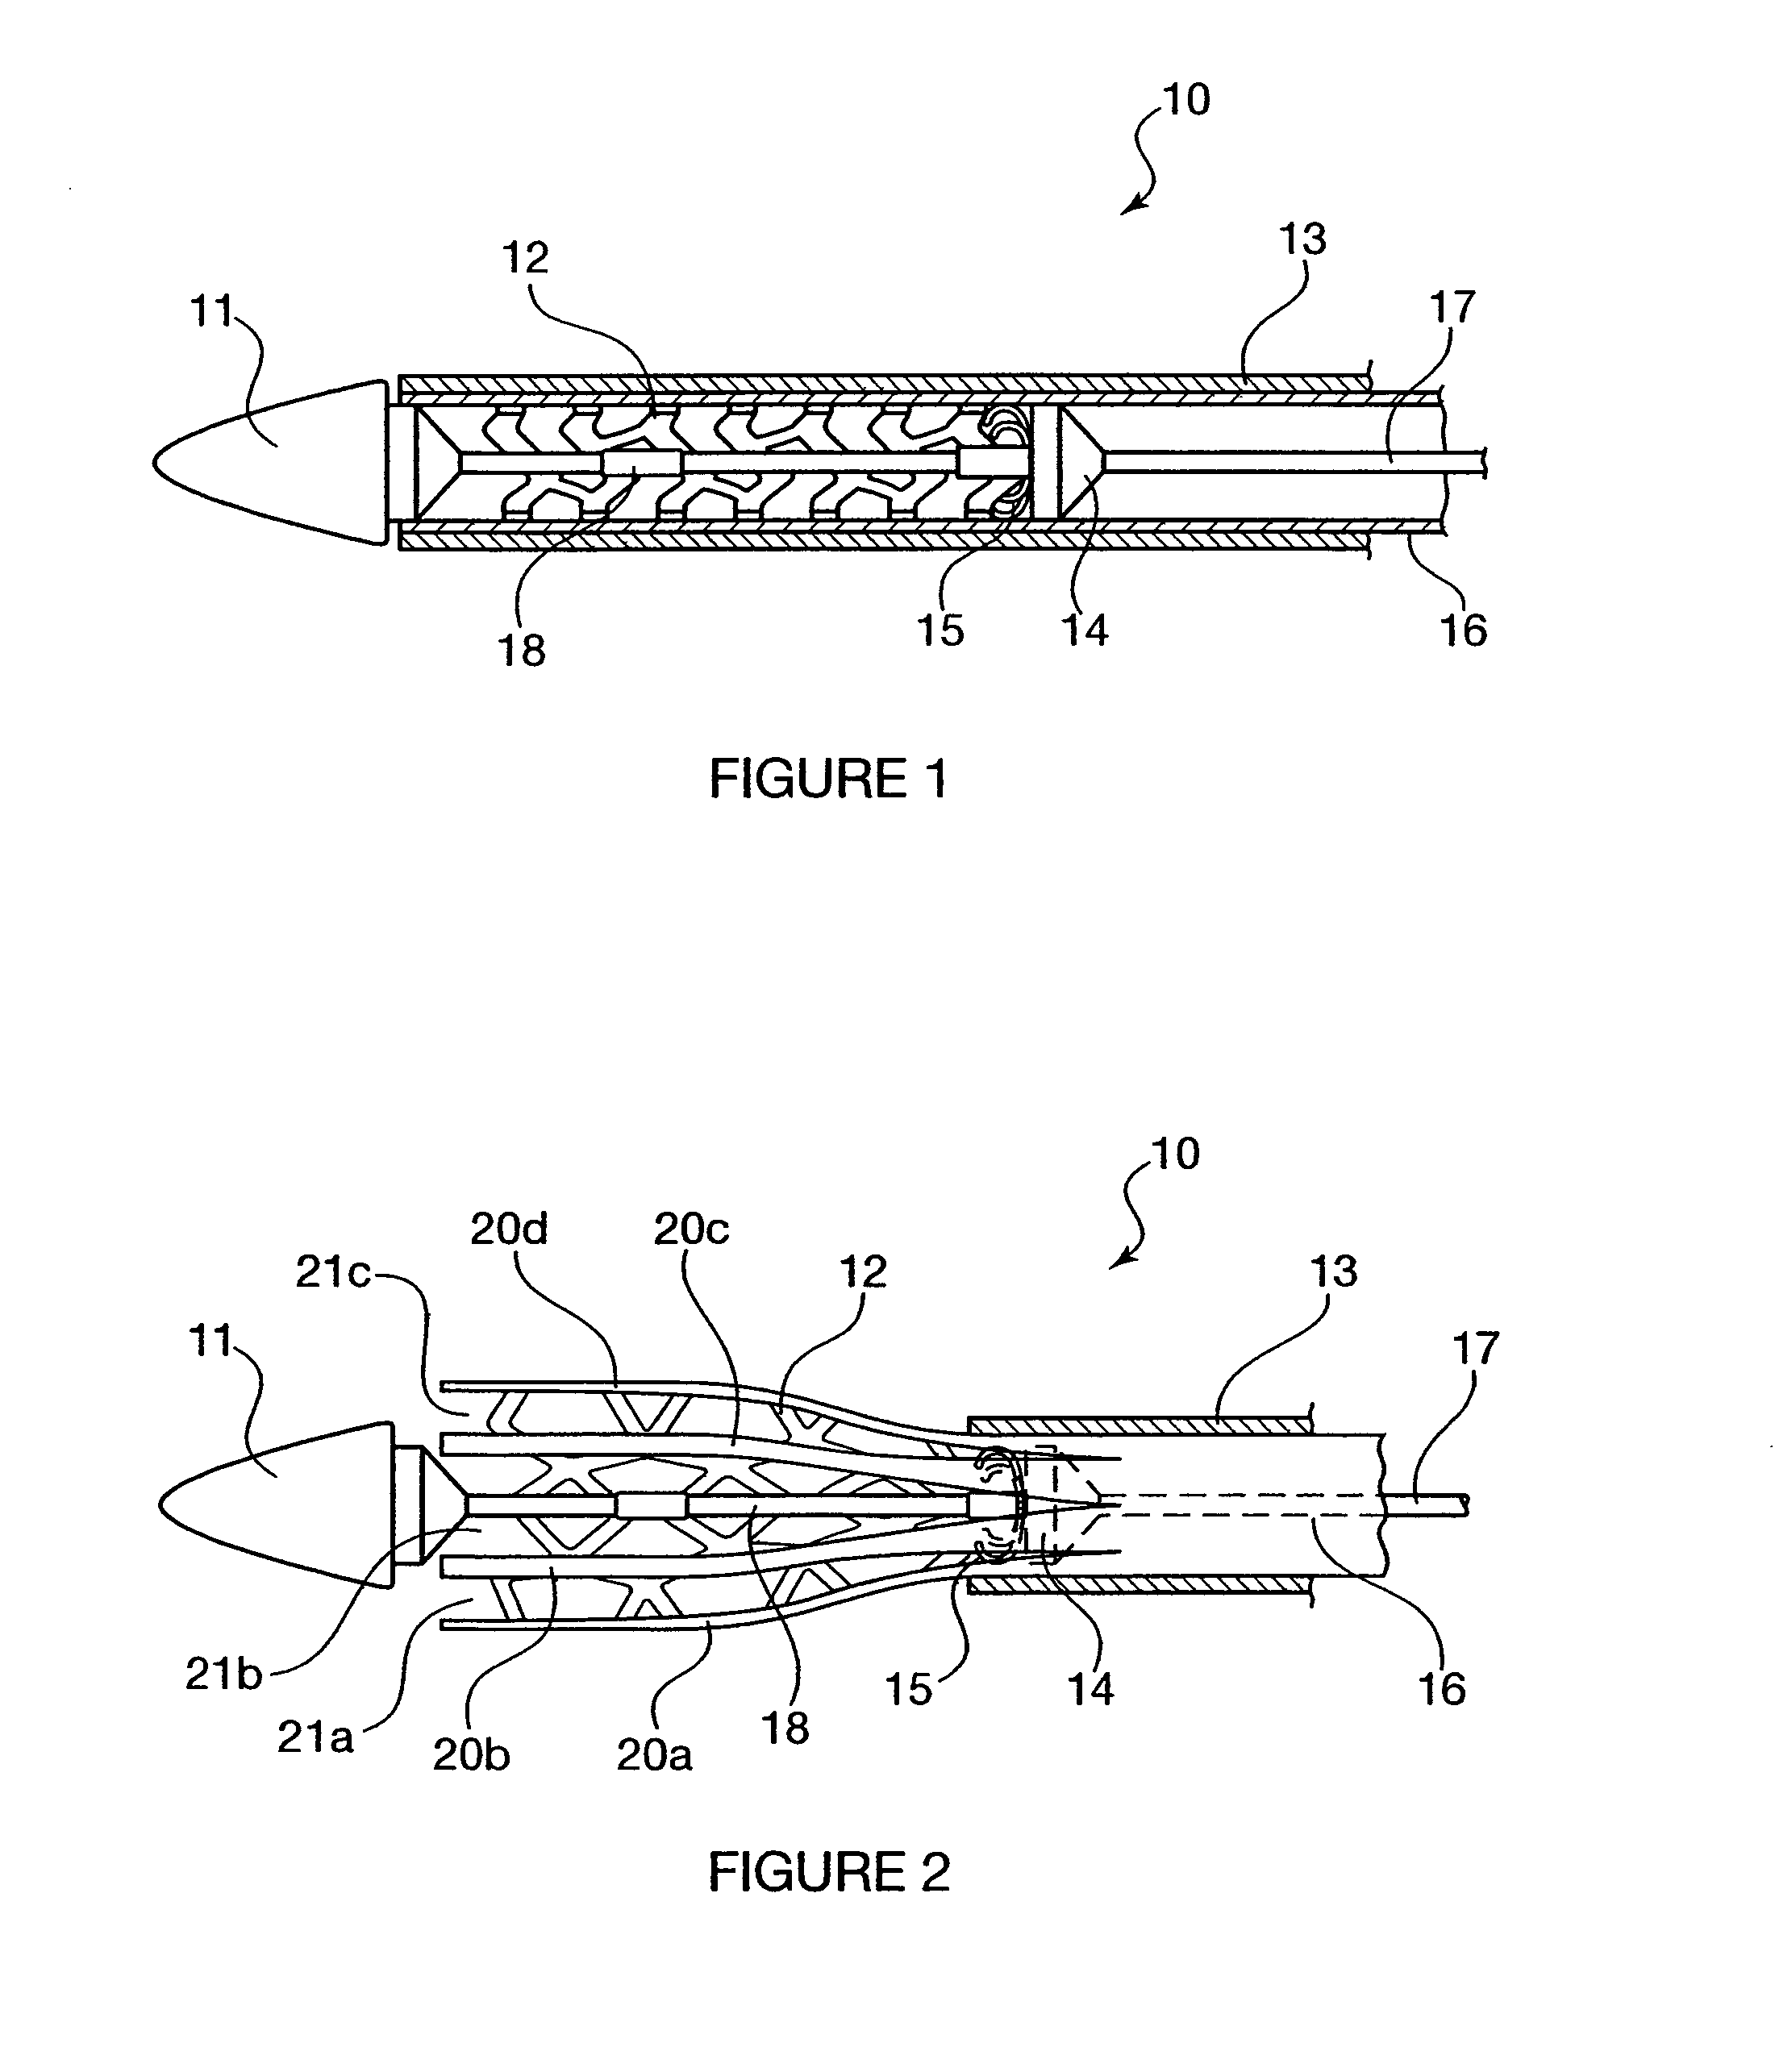 Self-expanding stent and delivery system